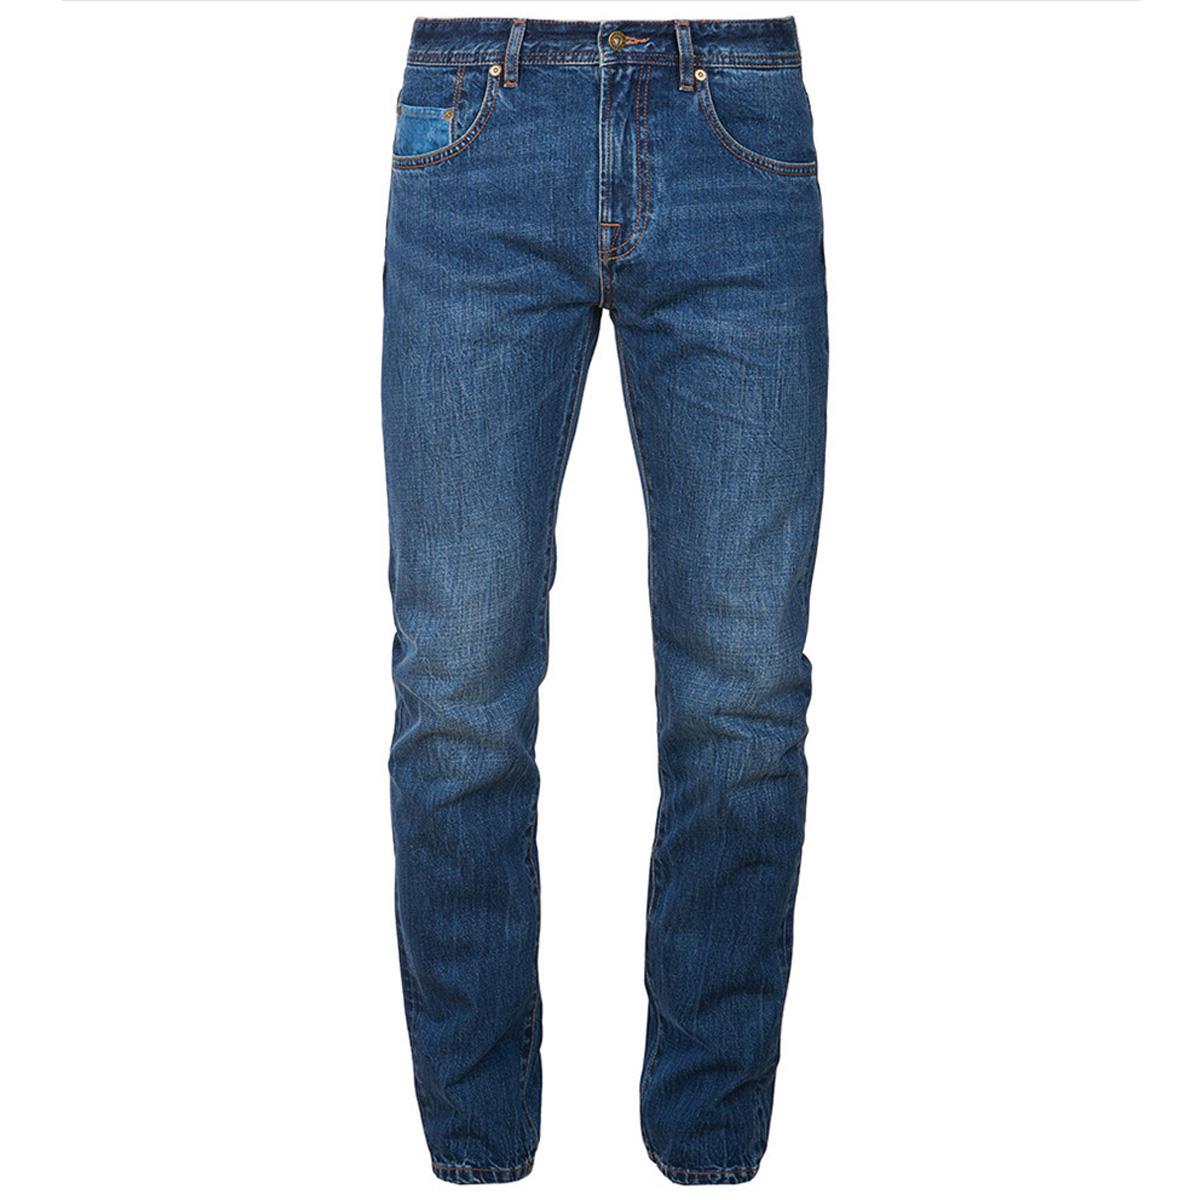 What is the regular fit of Barbour mens jeans?